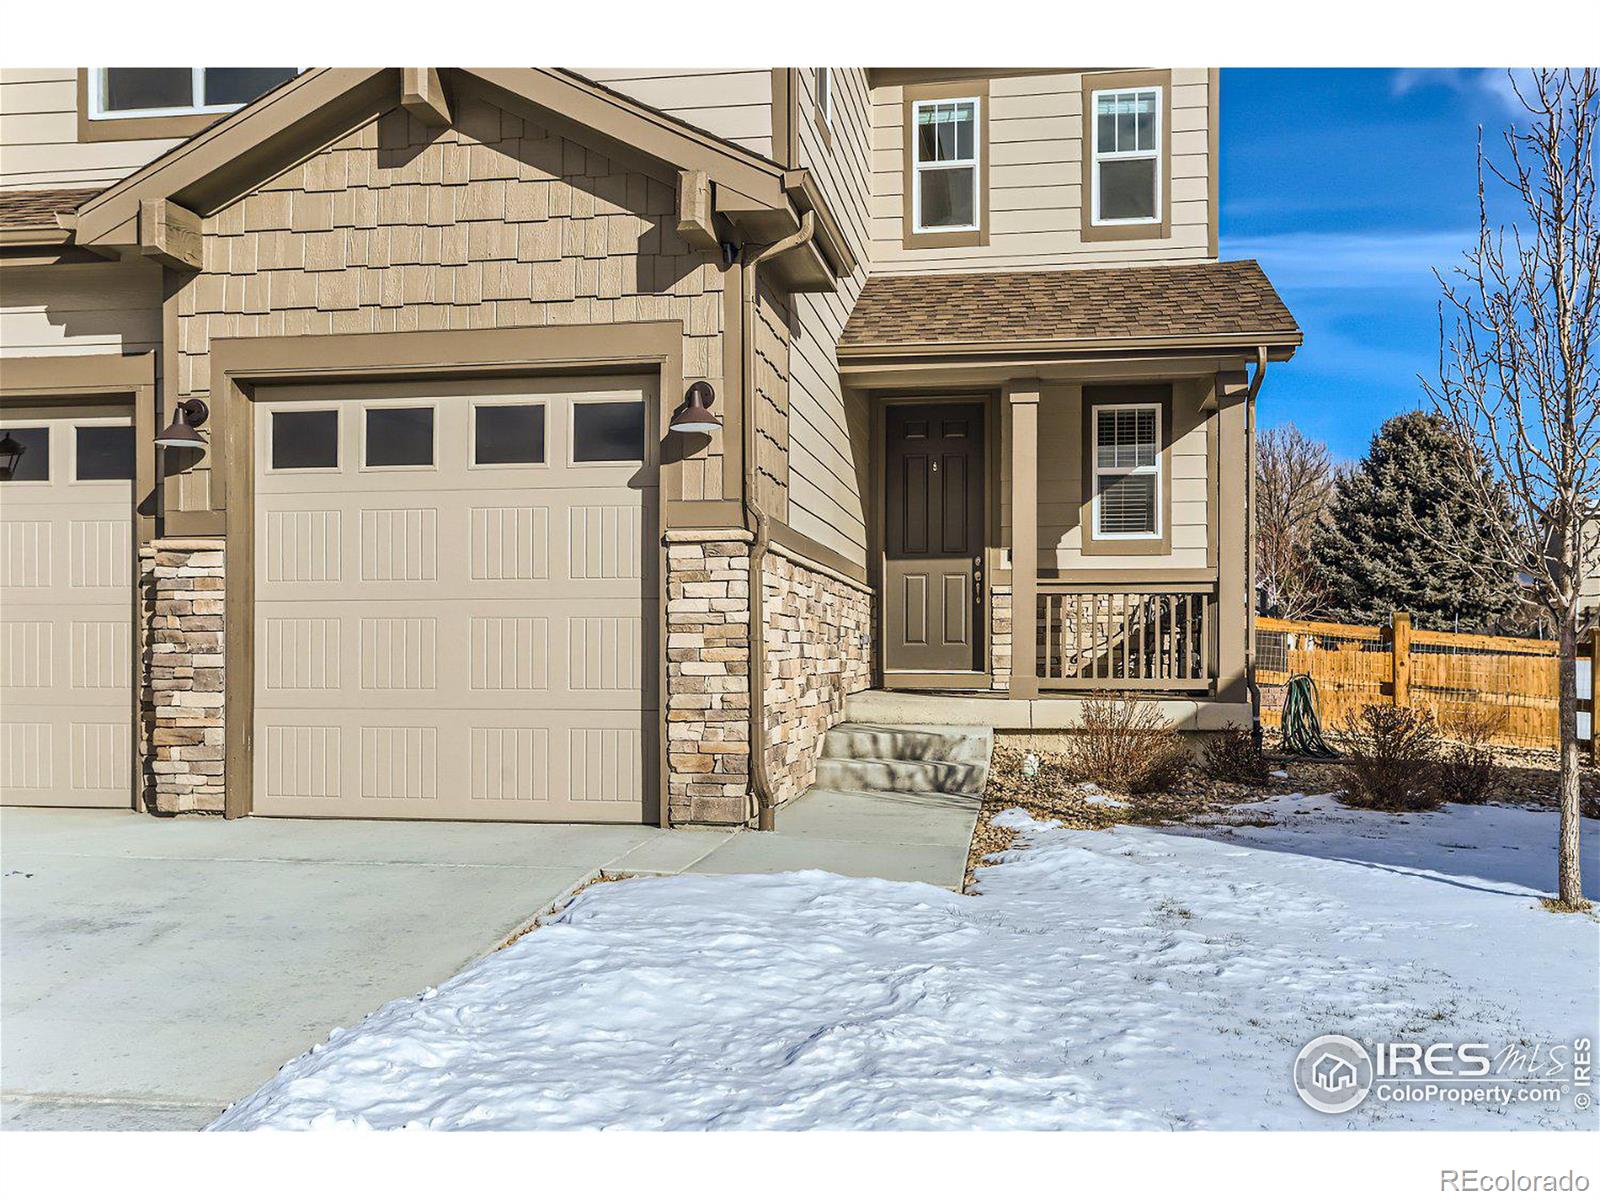 950  gabriella lane, Berthoud sold home. Closed on 2024-05-08 for $825,000.